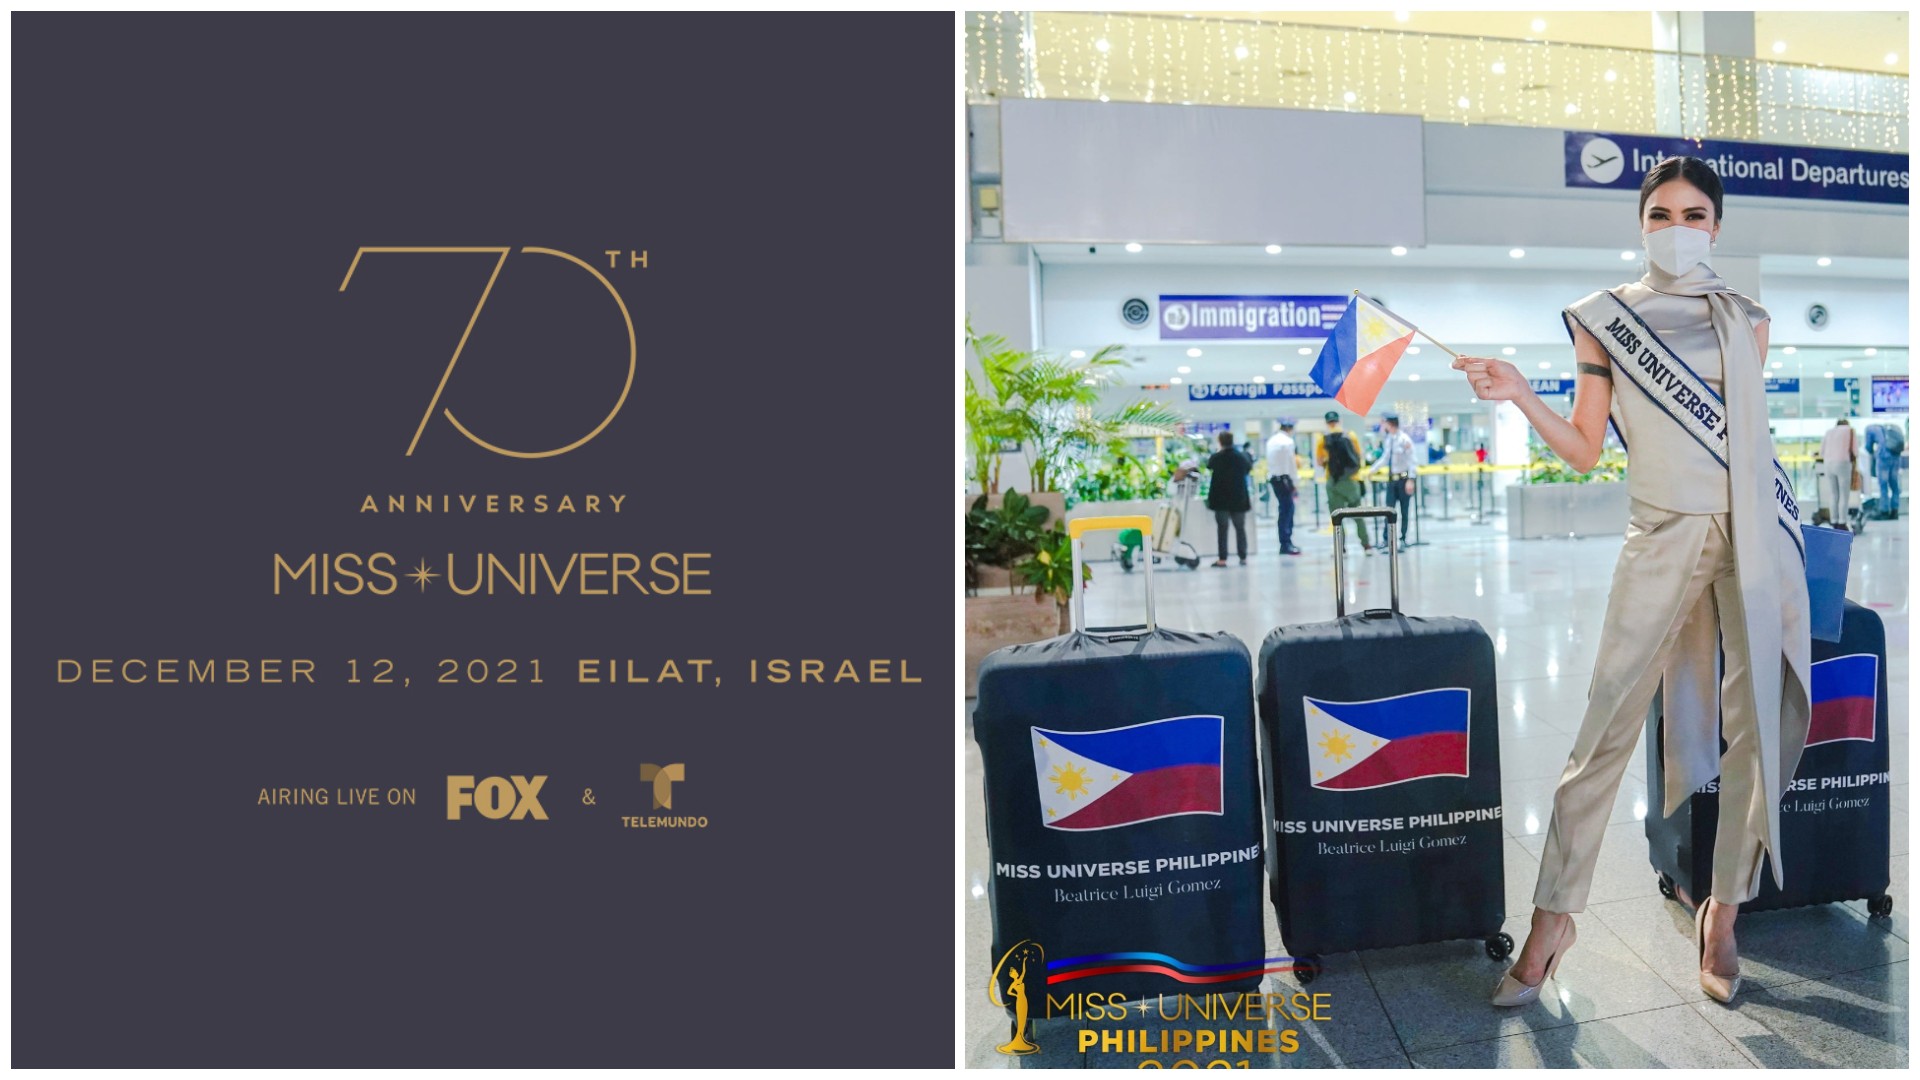 Miss Universe 2021 Global event The What & When?